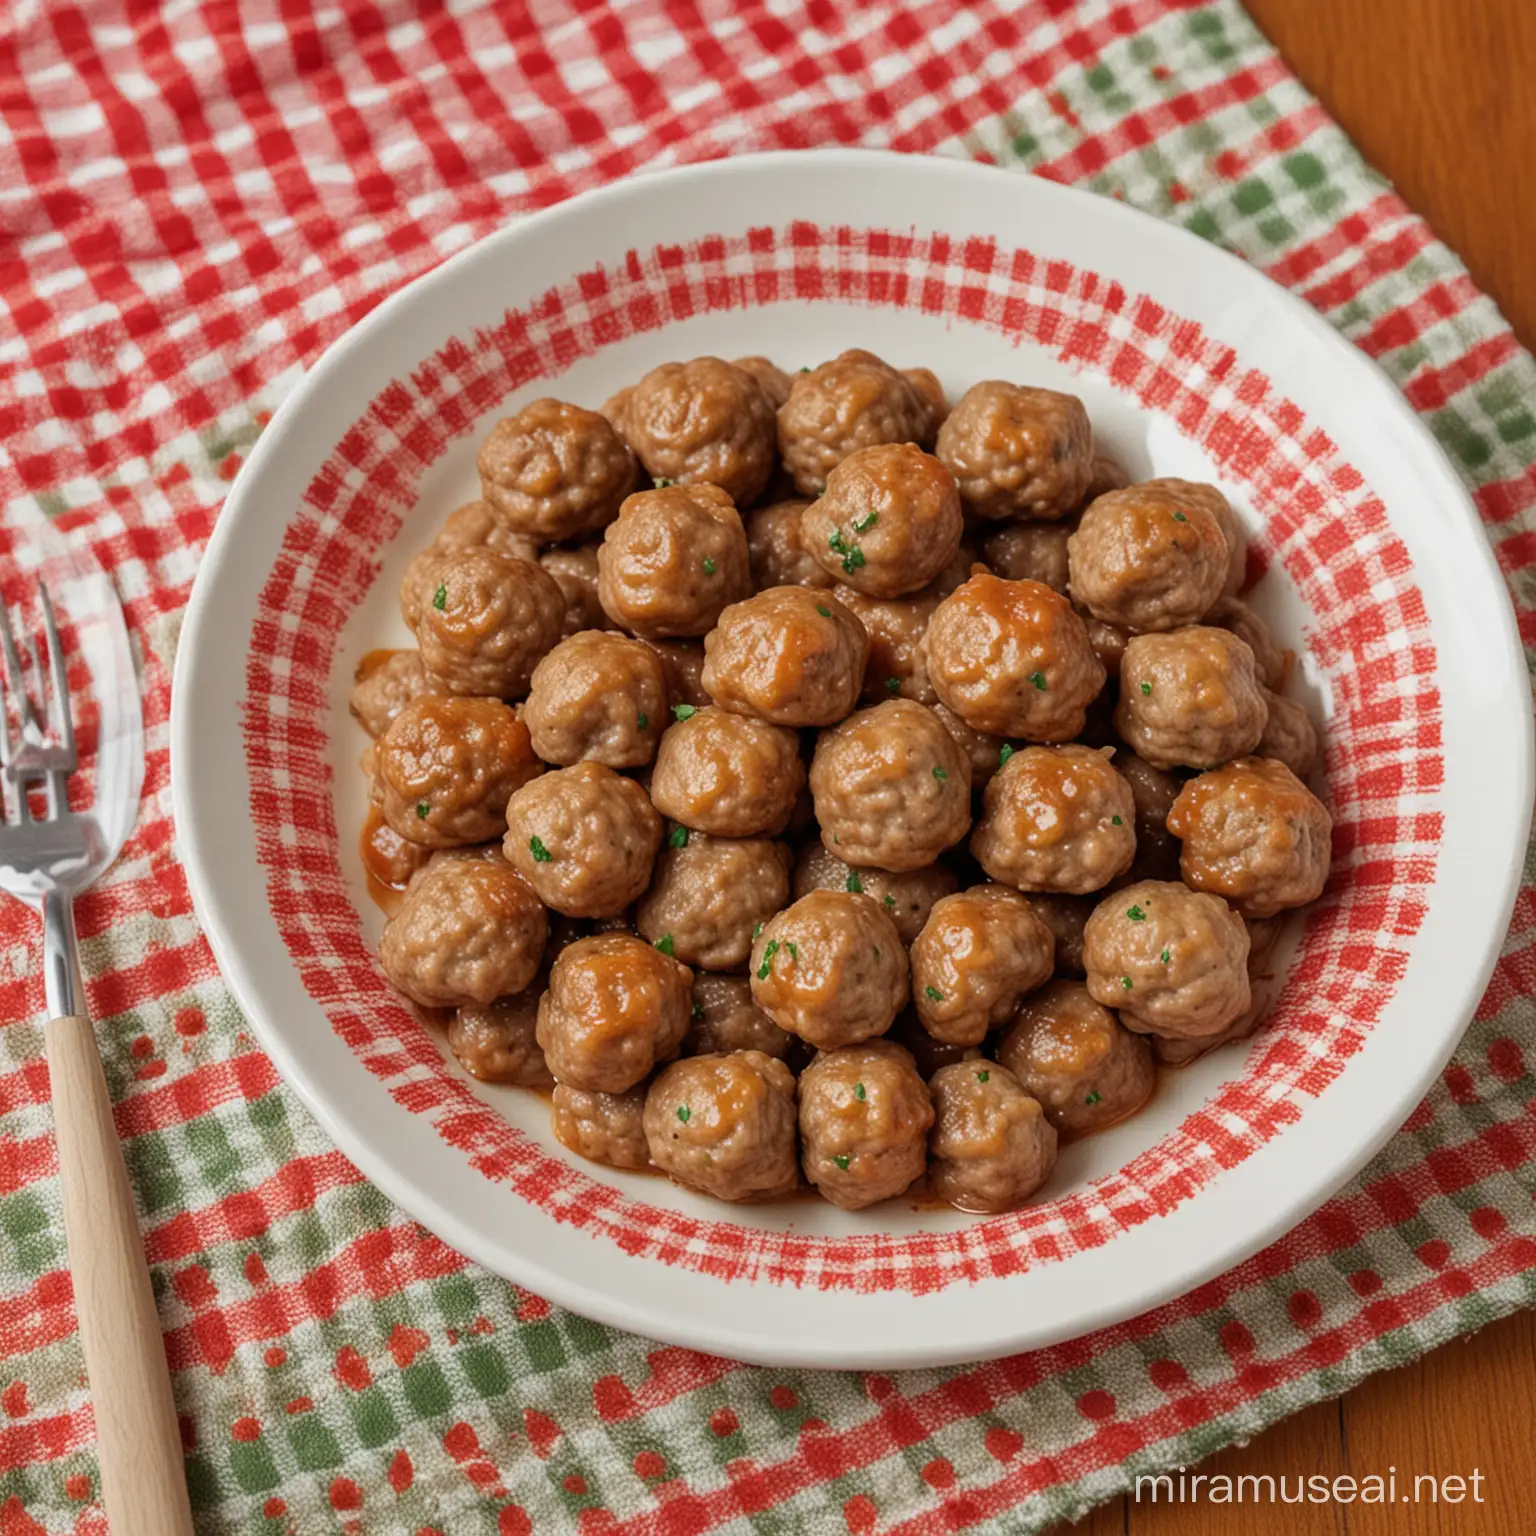 tiny meatballs for kids in a plate on a table with a nice tablecloth